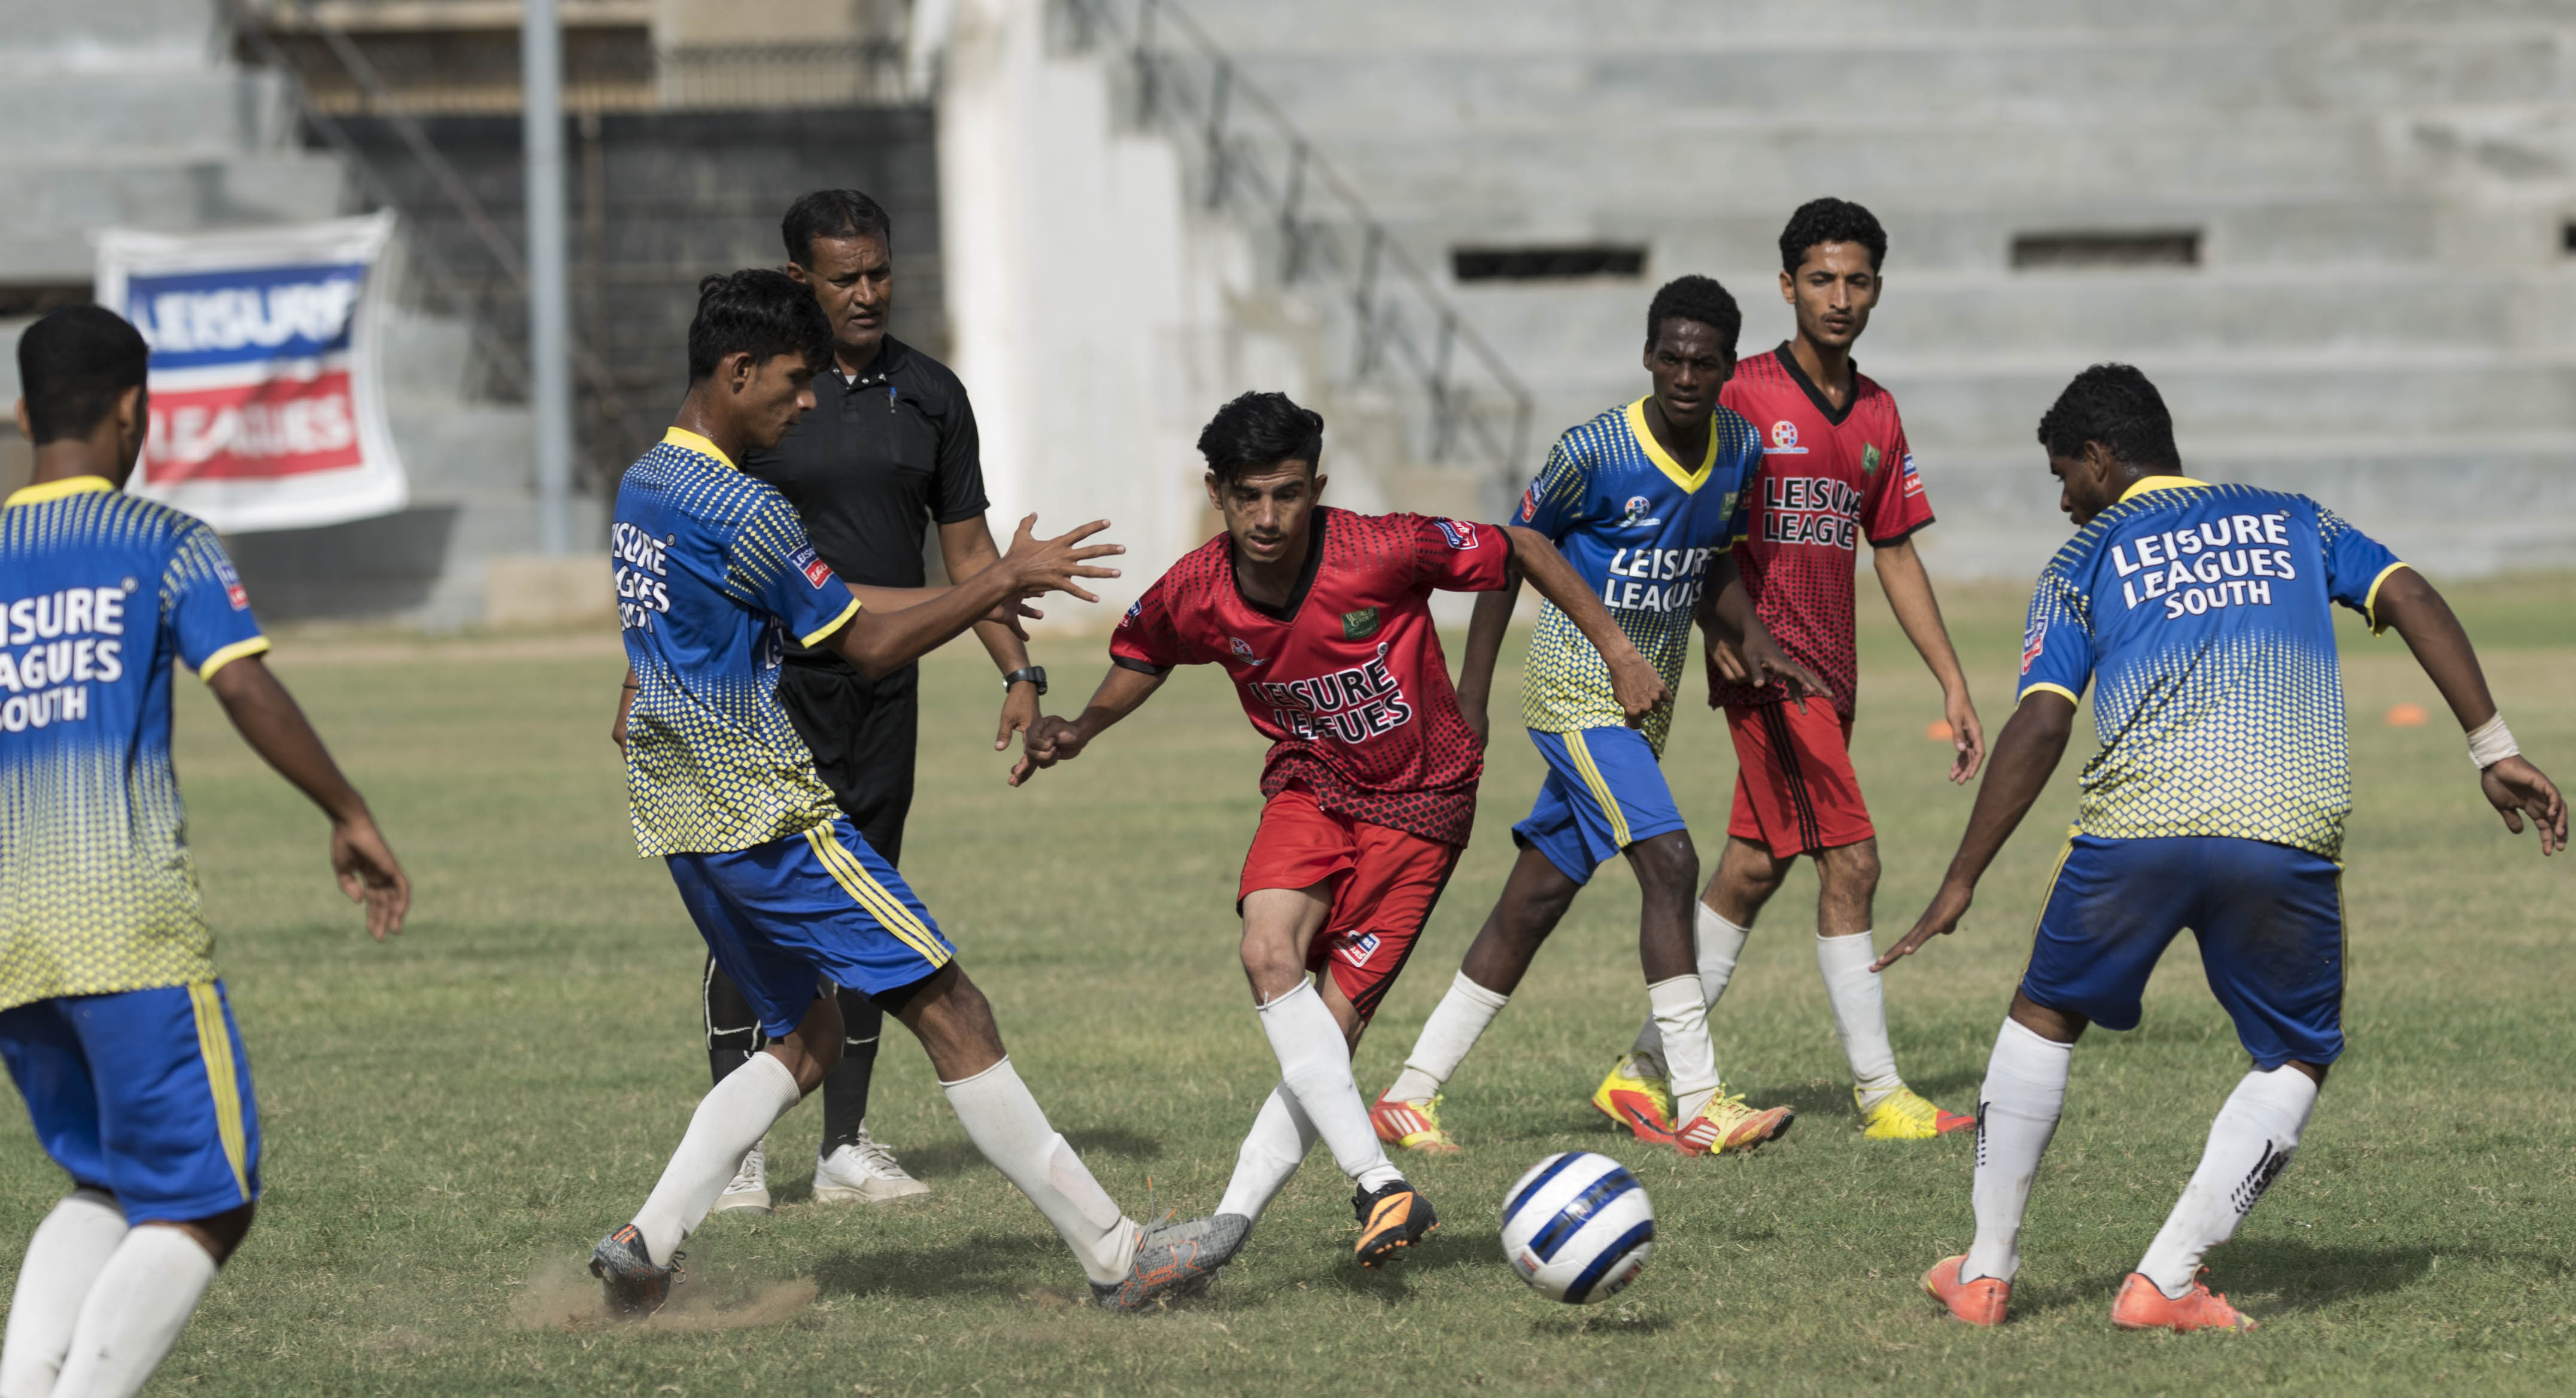 Khyber Muslim clinches Leisure Leagues Karachi Youth Initiative Football Championship title